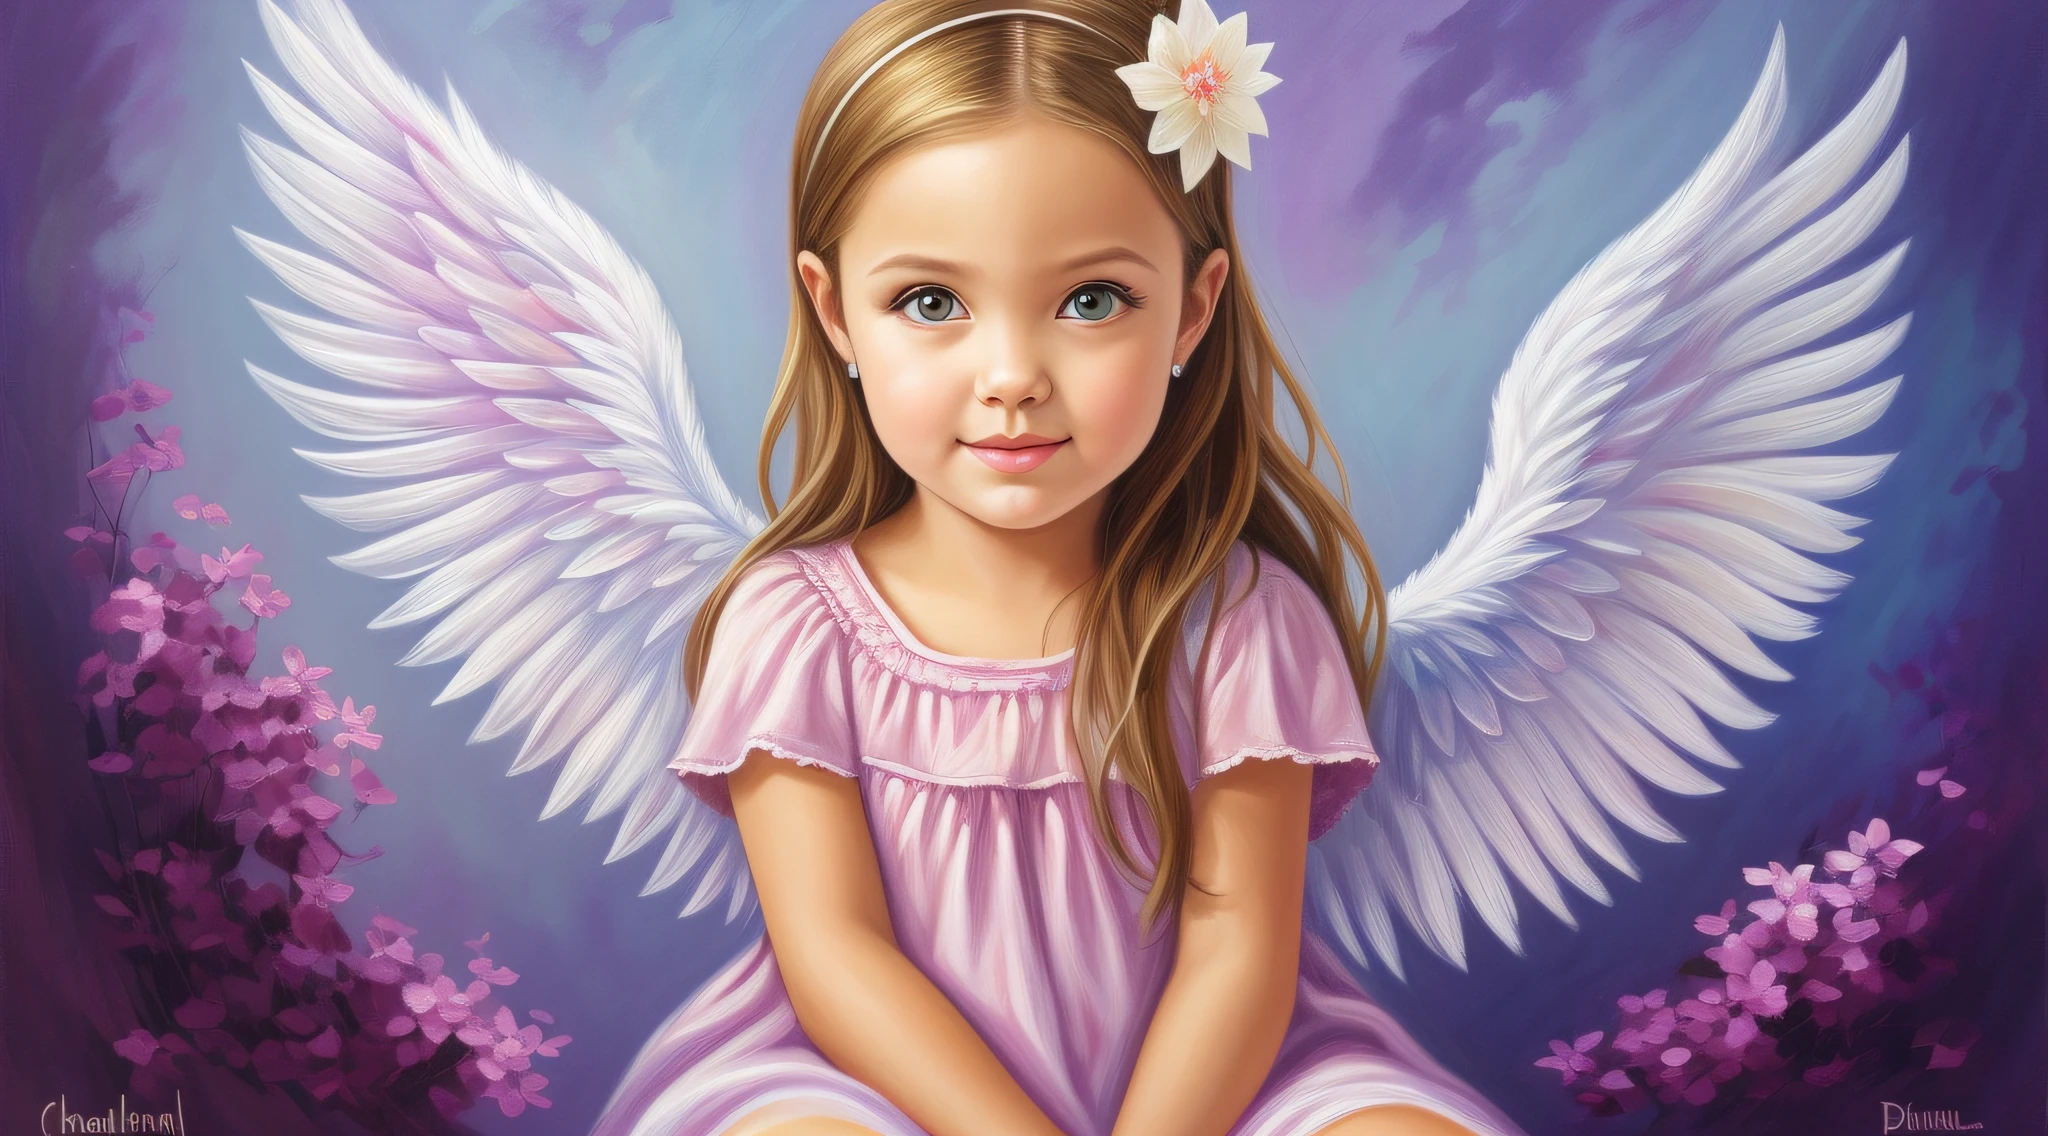 painting of a  with anjo wings sitting on a cloud, beautiful anjo, of beautiful anjo, of an beautiful anjo girl, portrait of a beautiful anjo, anjo girl, adorável pintura digital, beautiful anjo girl portrait, anjo, anjo-themed, querubim, full of paintings of anjos, anjoic face, anjoical, anjo face, beautiful female anjo, anjos --auto --s2